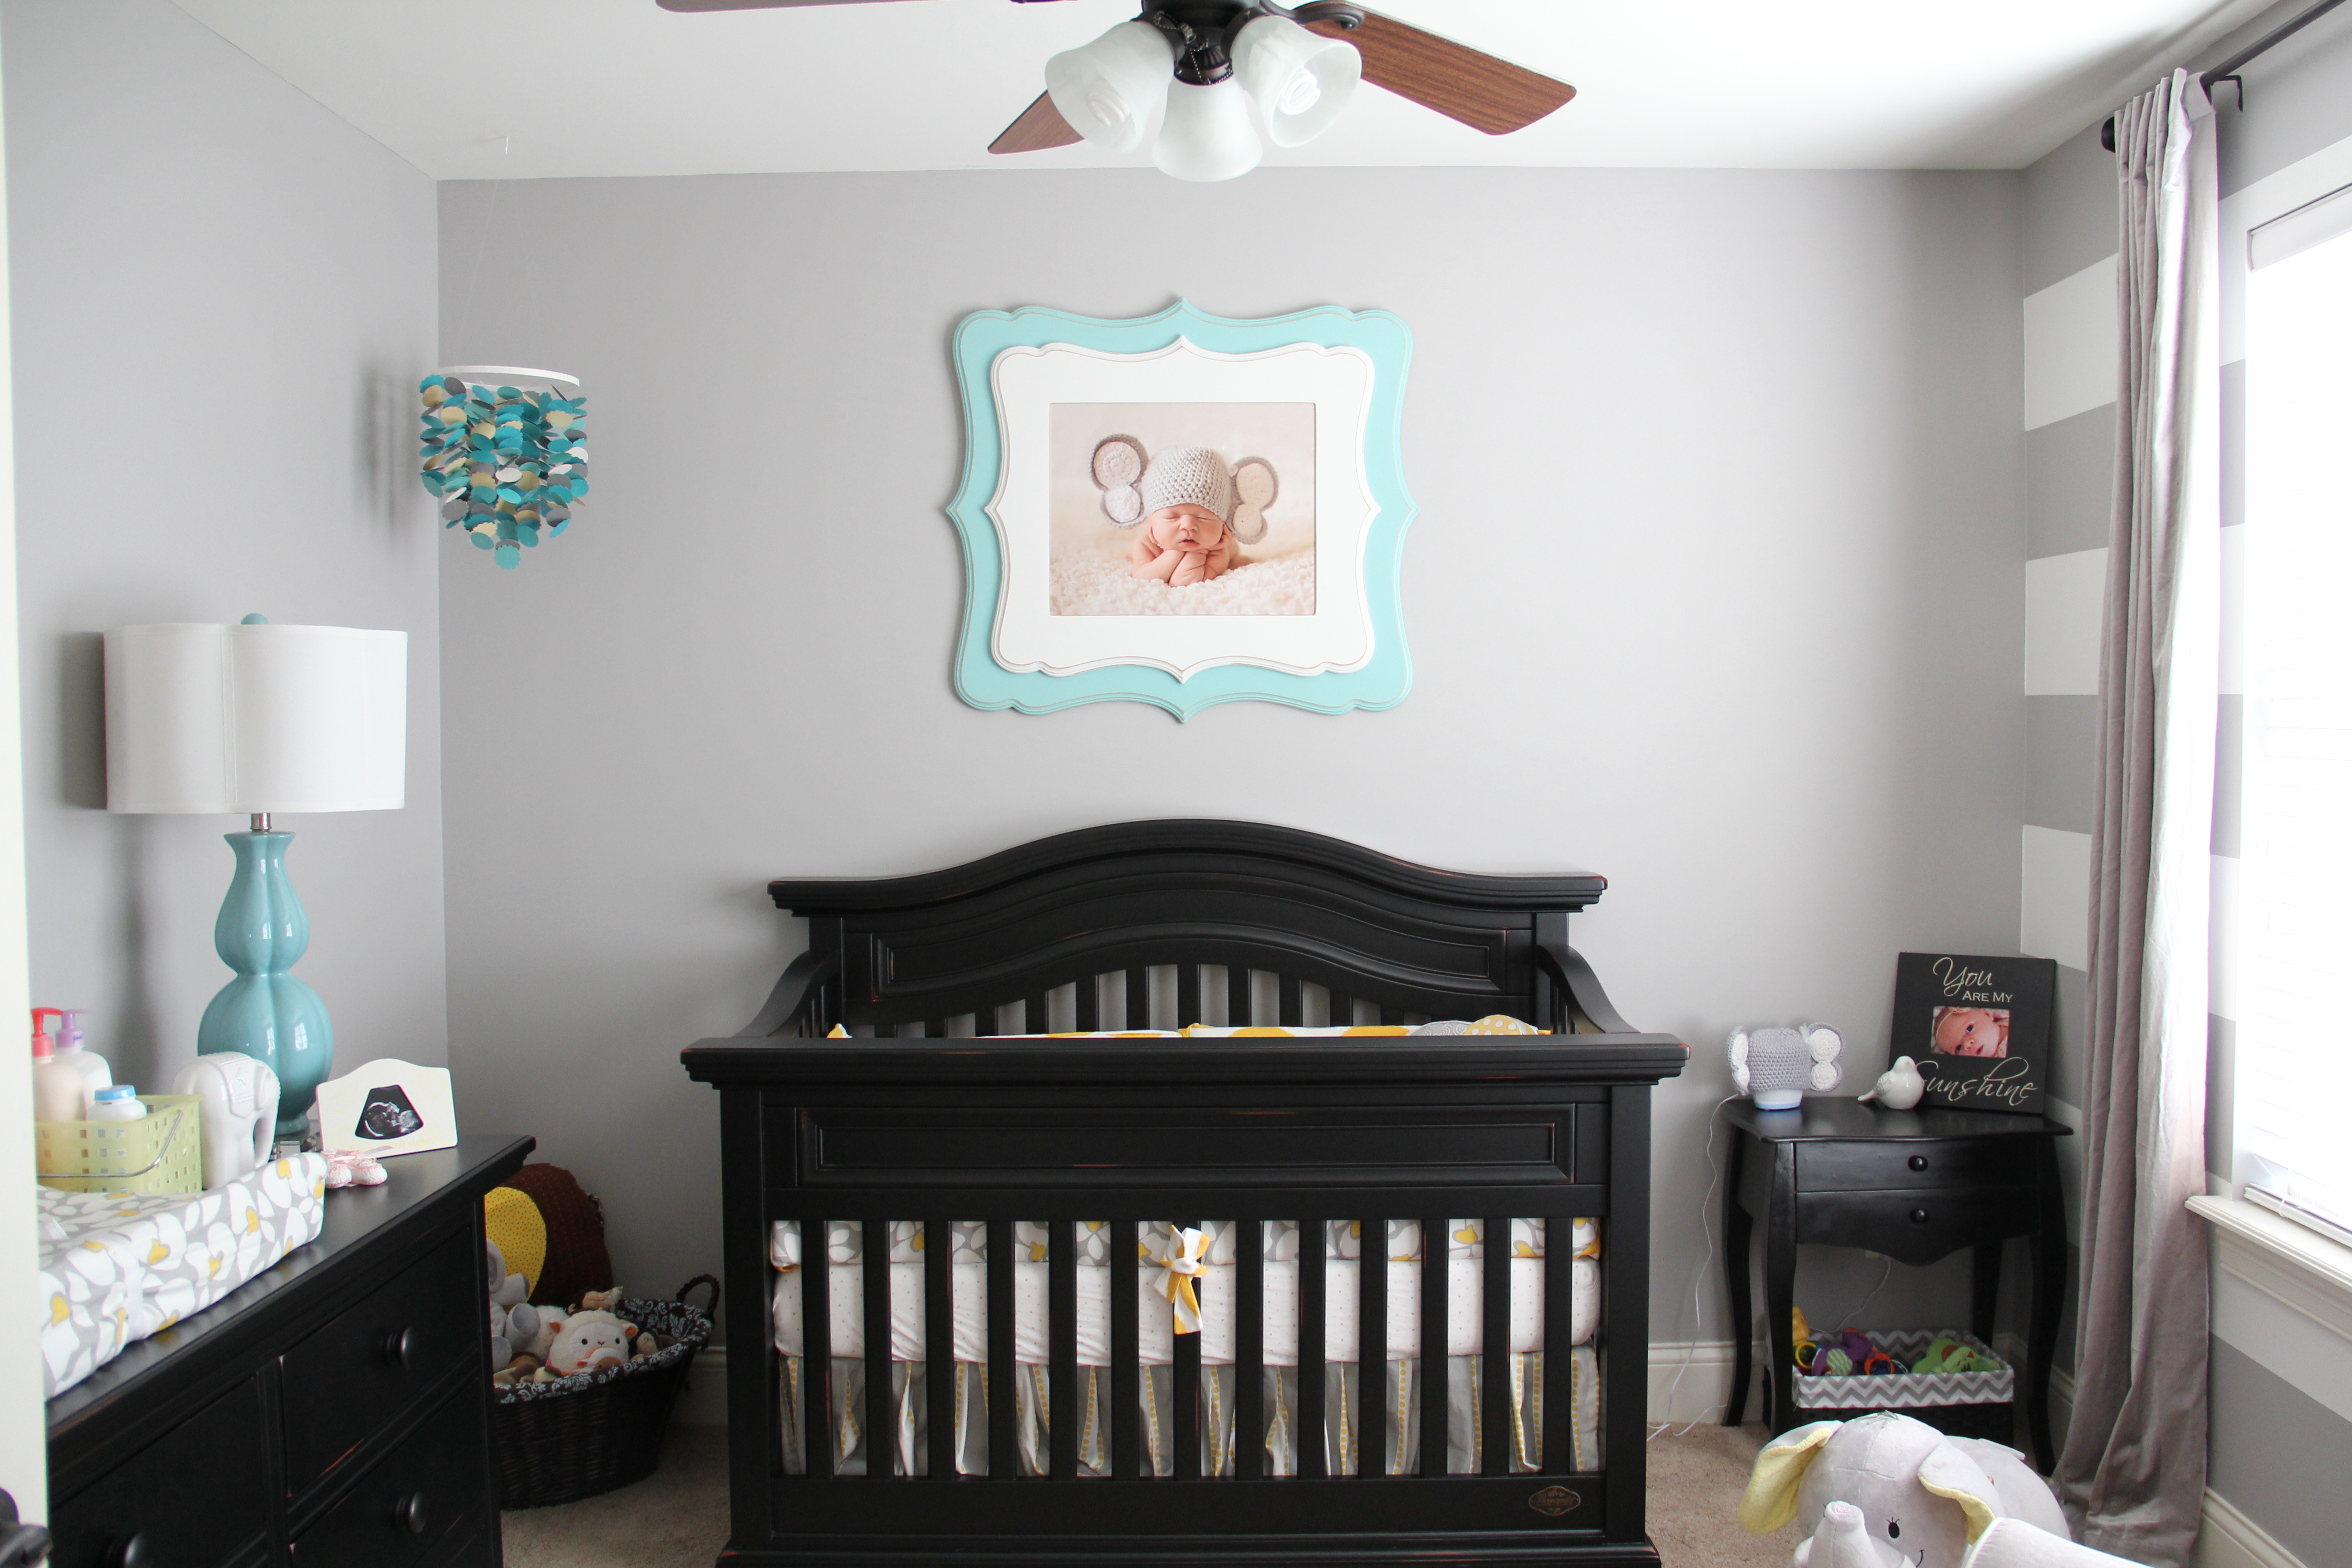 Enchanting Grey Paint For Nursery s Best inspiration home